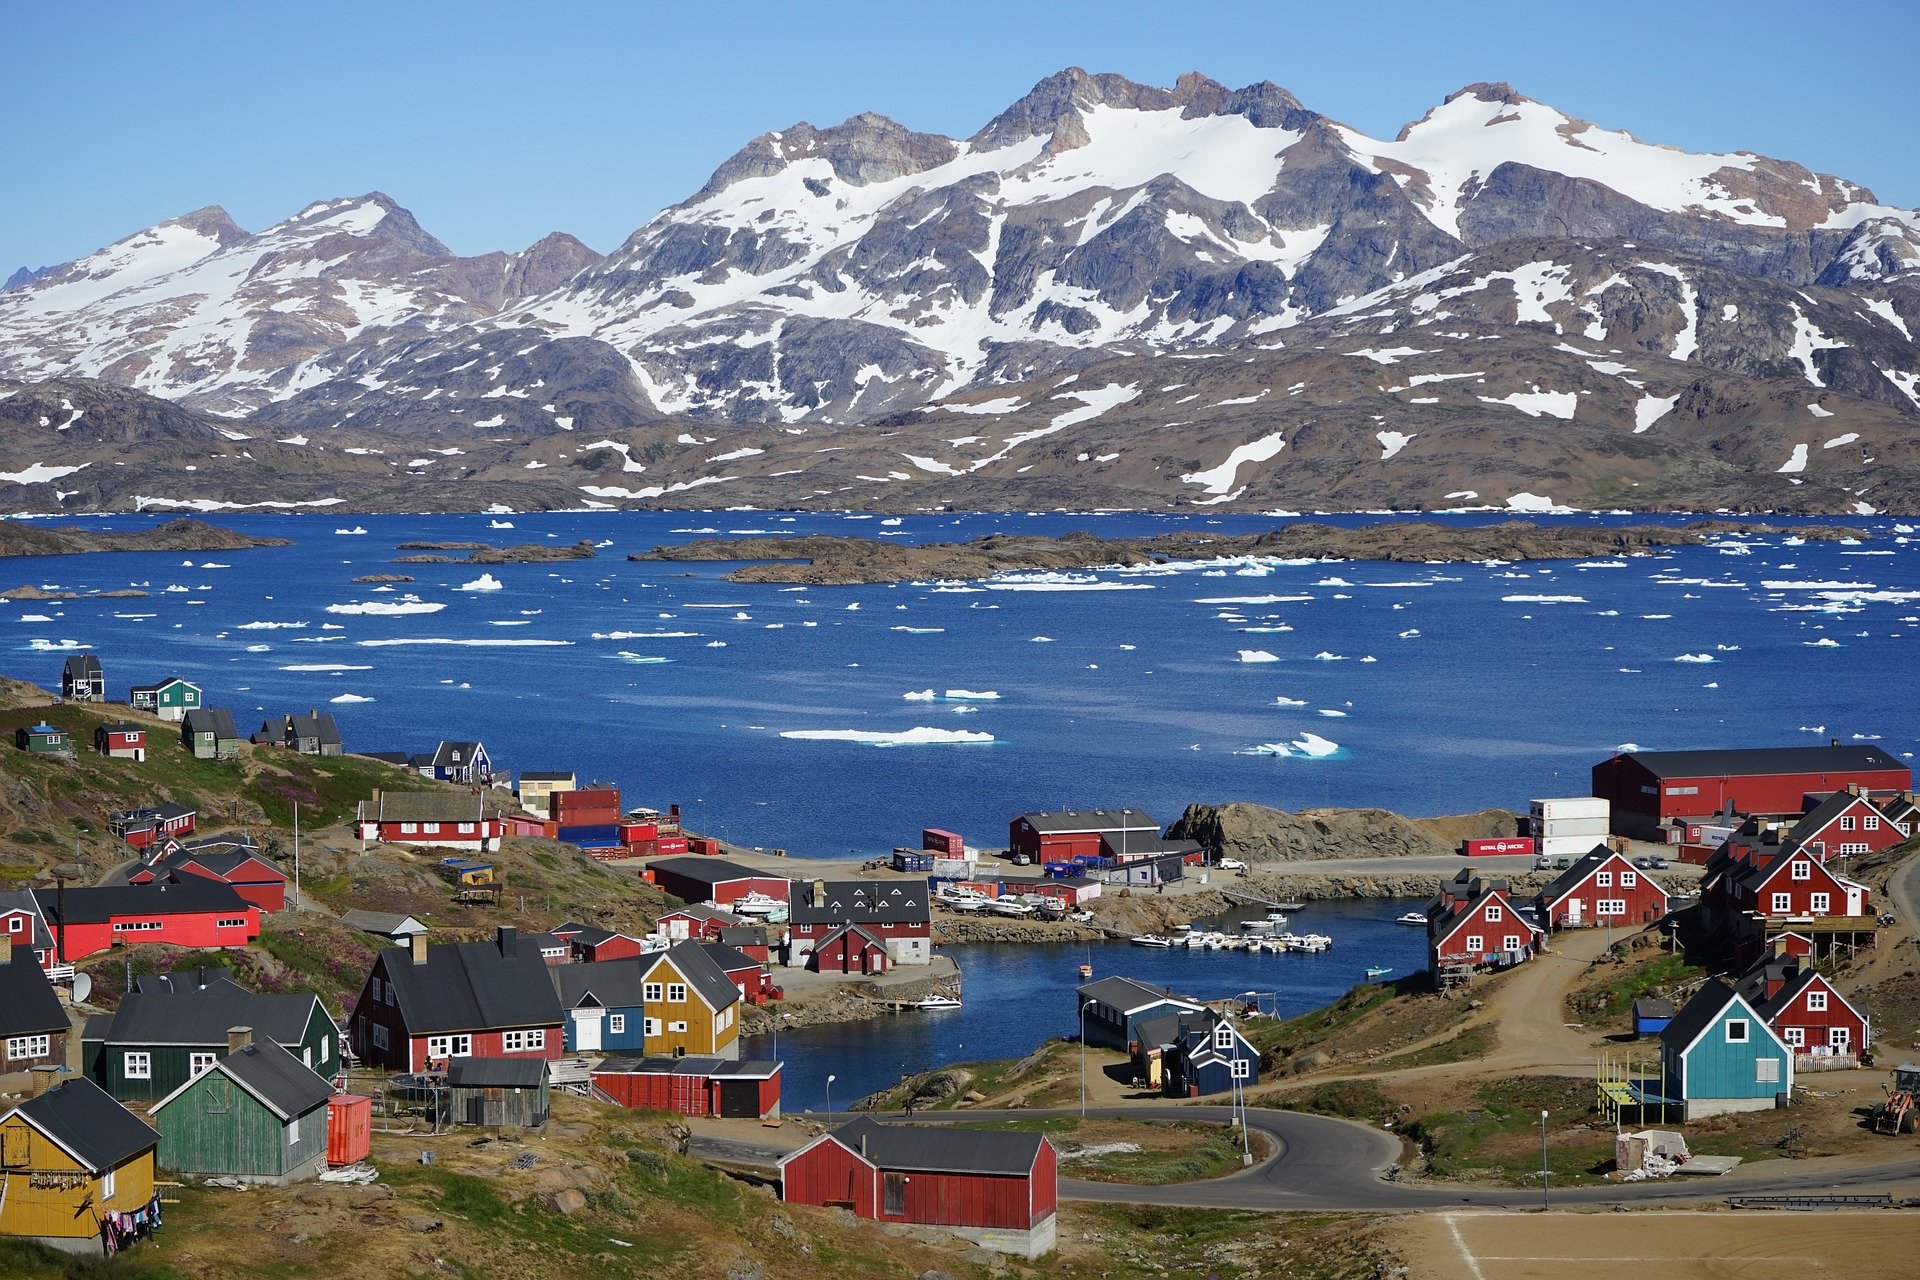 Folkecenter will have a project in Greenland